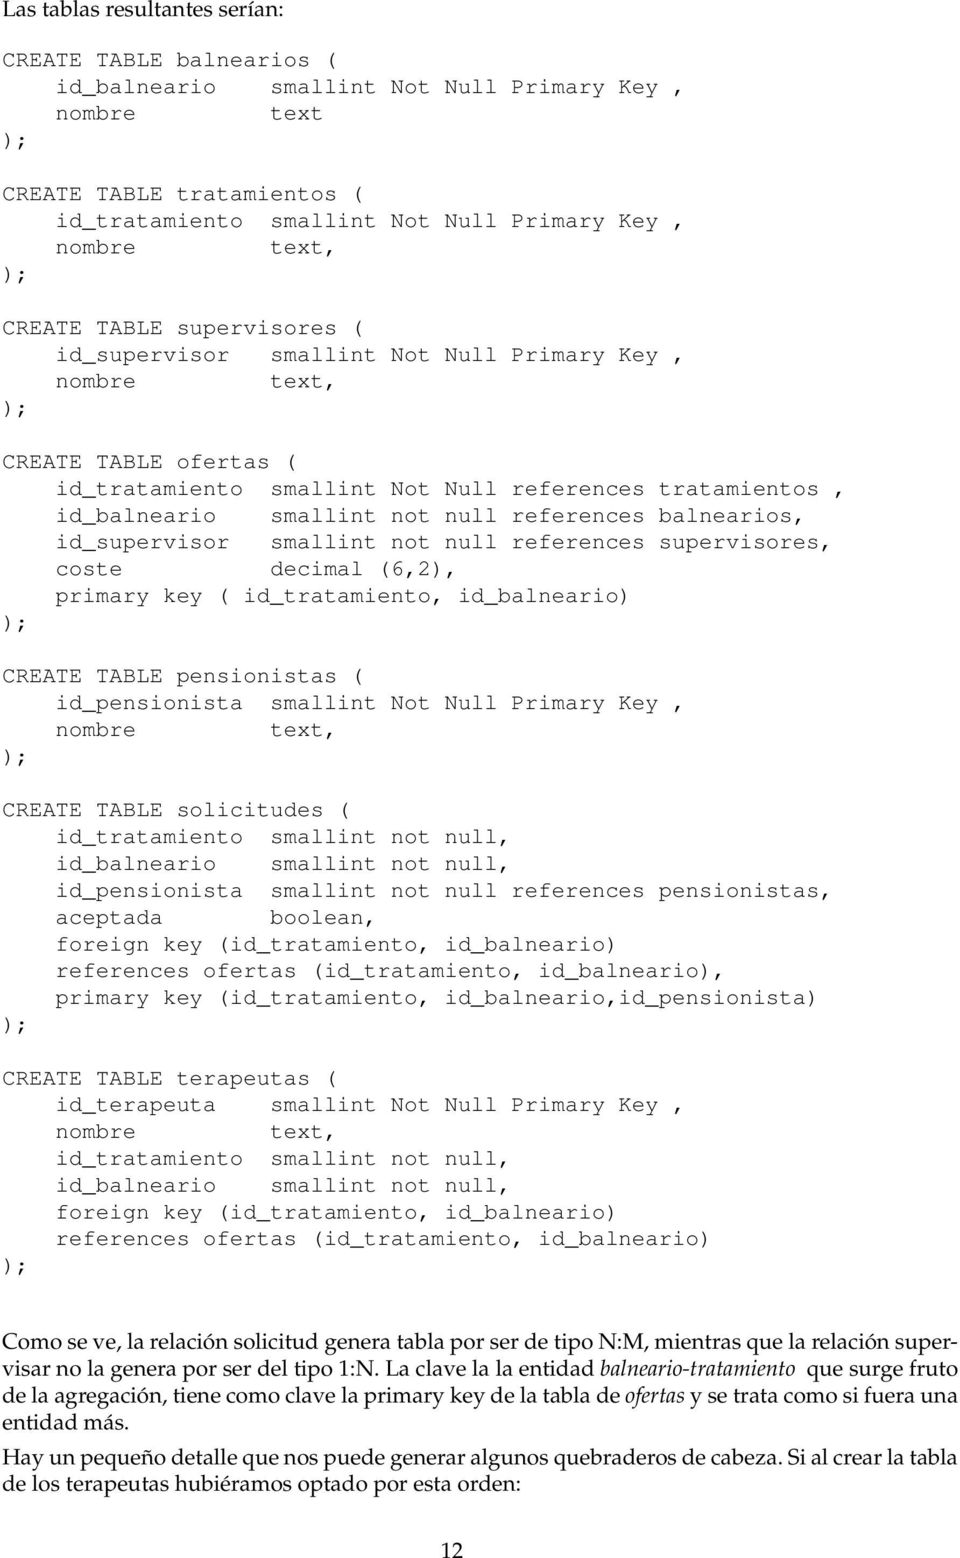 pensionistas ( id_pensionista smallint Not Null Primary Key, CREATE TABLE solicitudes ( id_tratamiento smallint not null, id_balneario smallint not null, id_pensionista smallint not null references